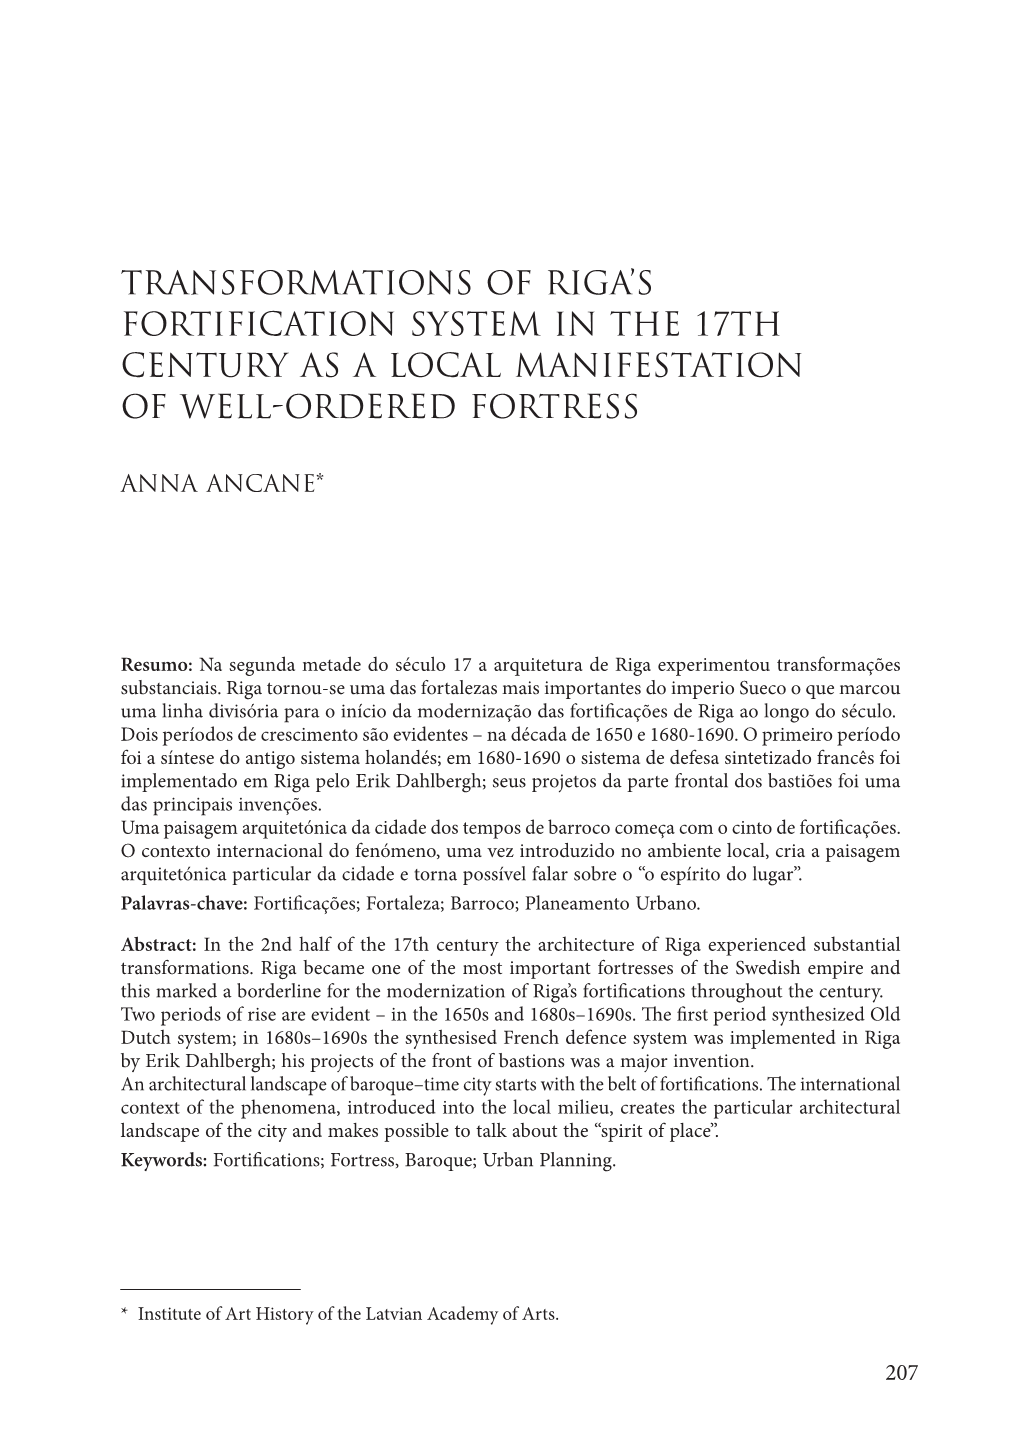 Transformations of Riga's Fortification System in The